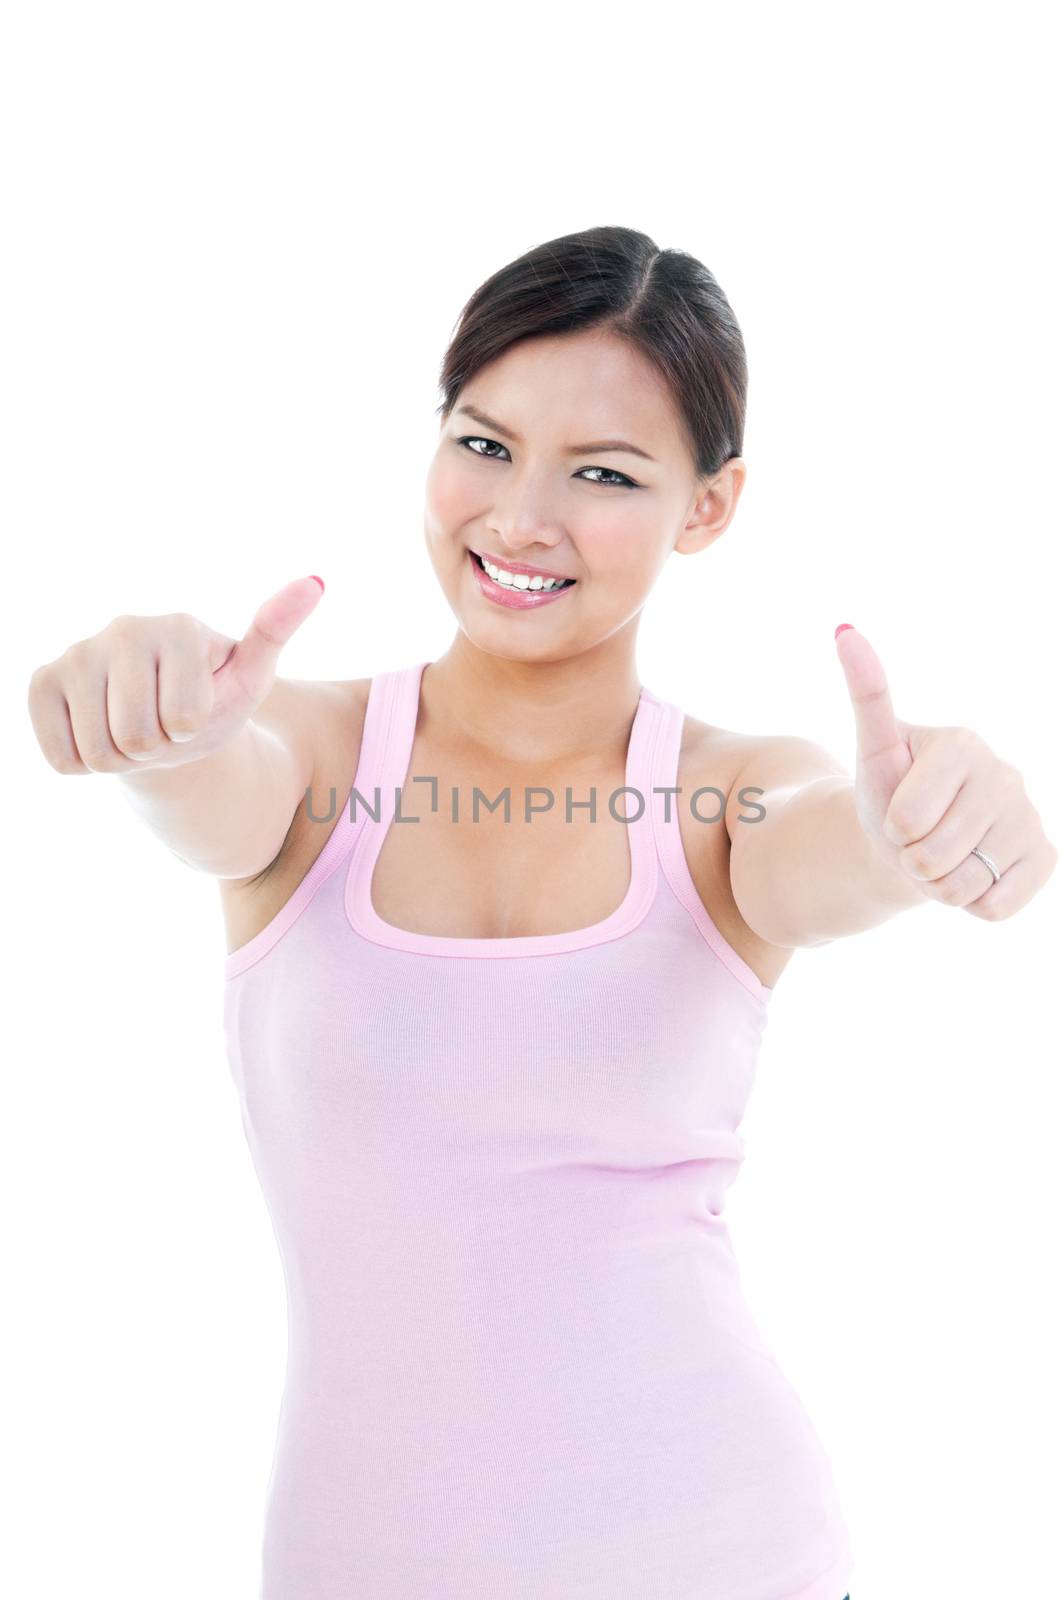 Beautiful woman giving two thumbs up over white background.